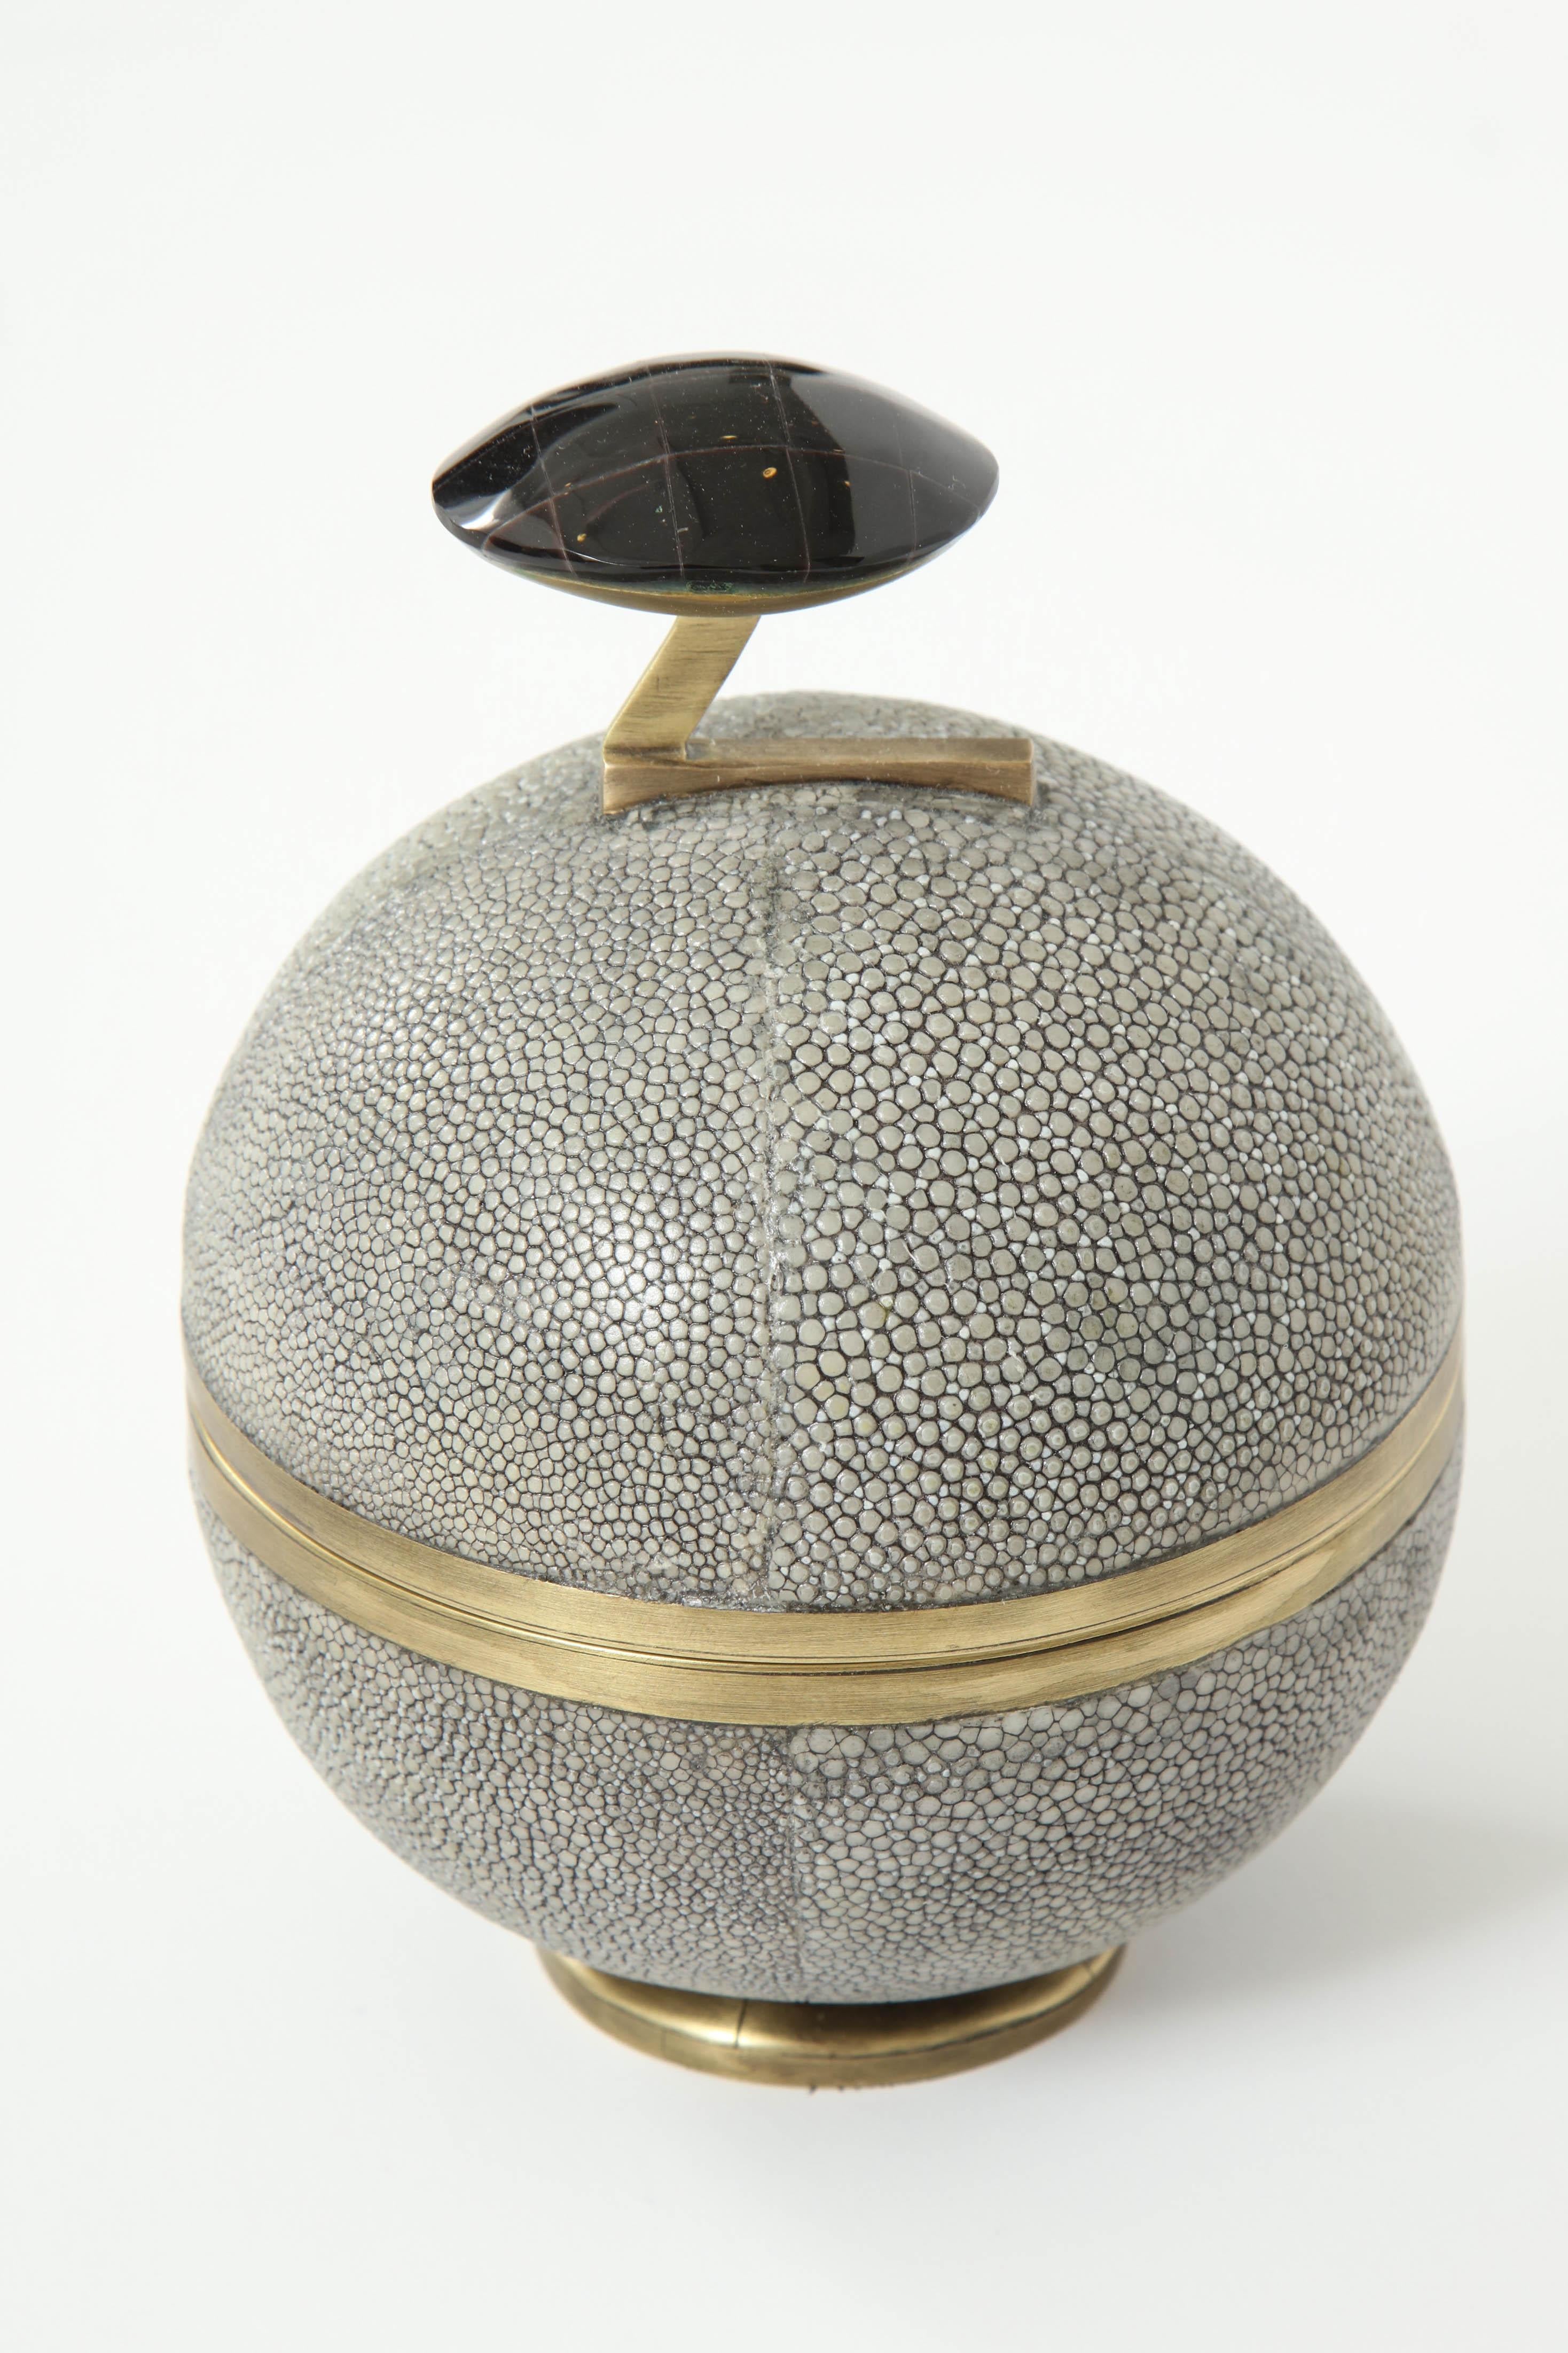 Decorative grey shagreen box with brass details and the knob is made of sea shell. Inside the box is a beautiful design with palm wood. Designed in France. 
It opens with a swirl.
Delivery time 12-14 weeks.